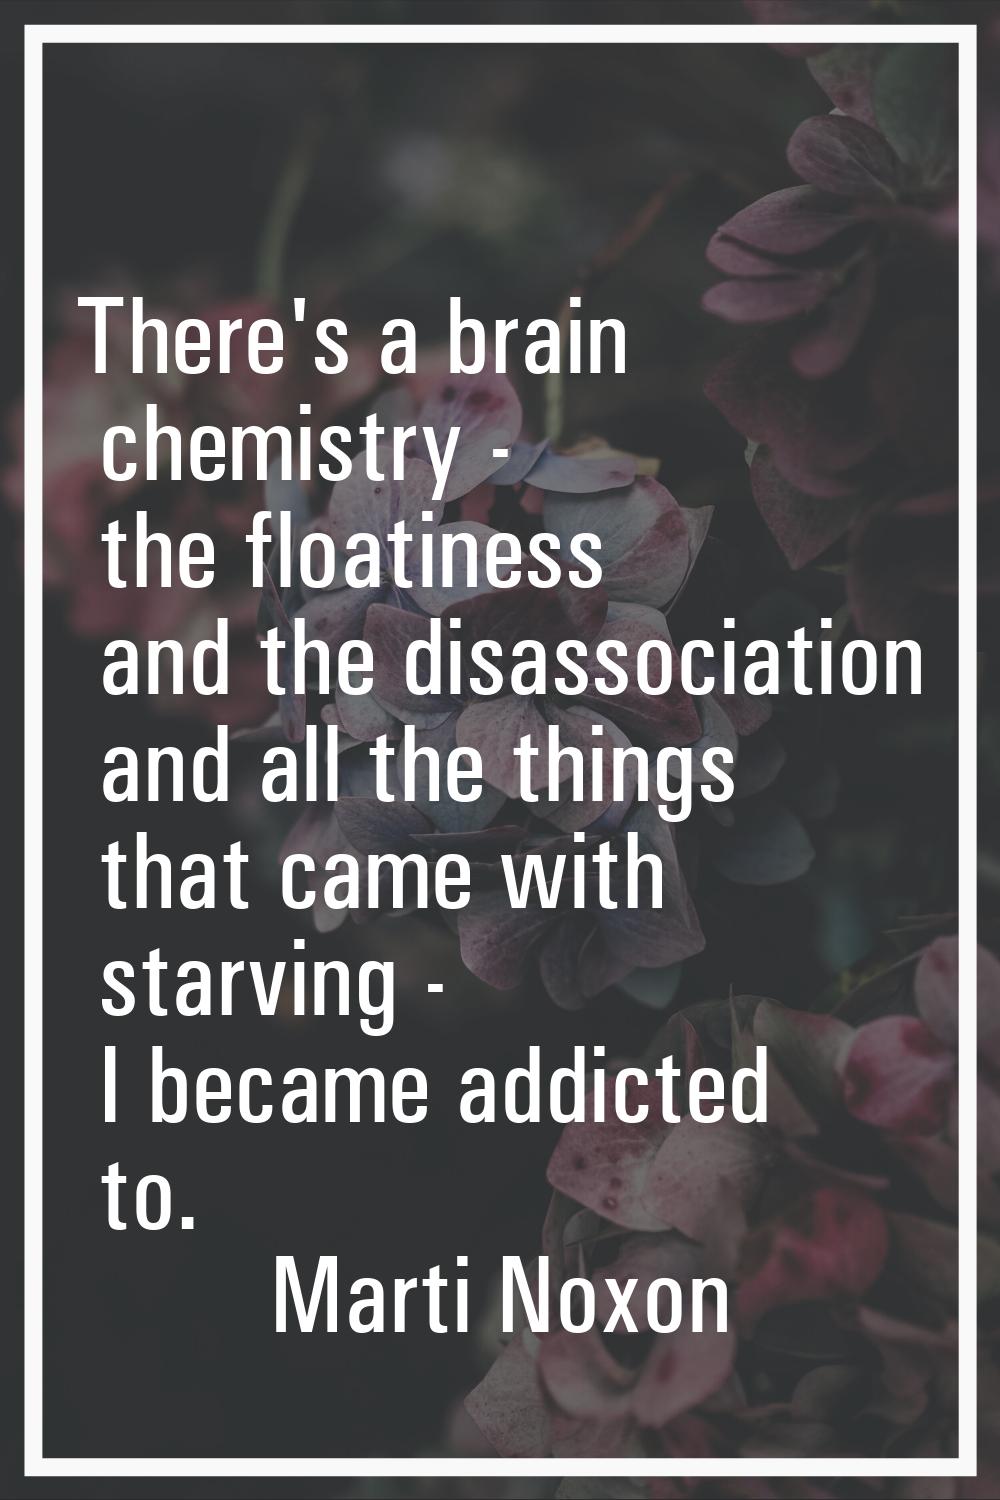 There's a brain chemistry - the floatiness and the disassociation and all the things that came with